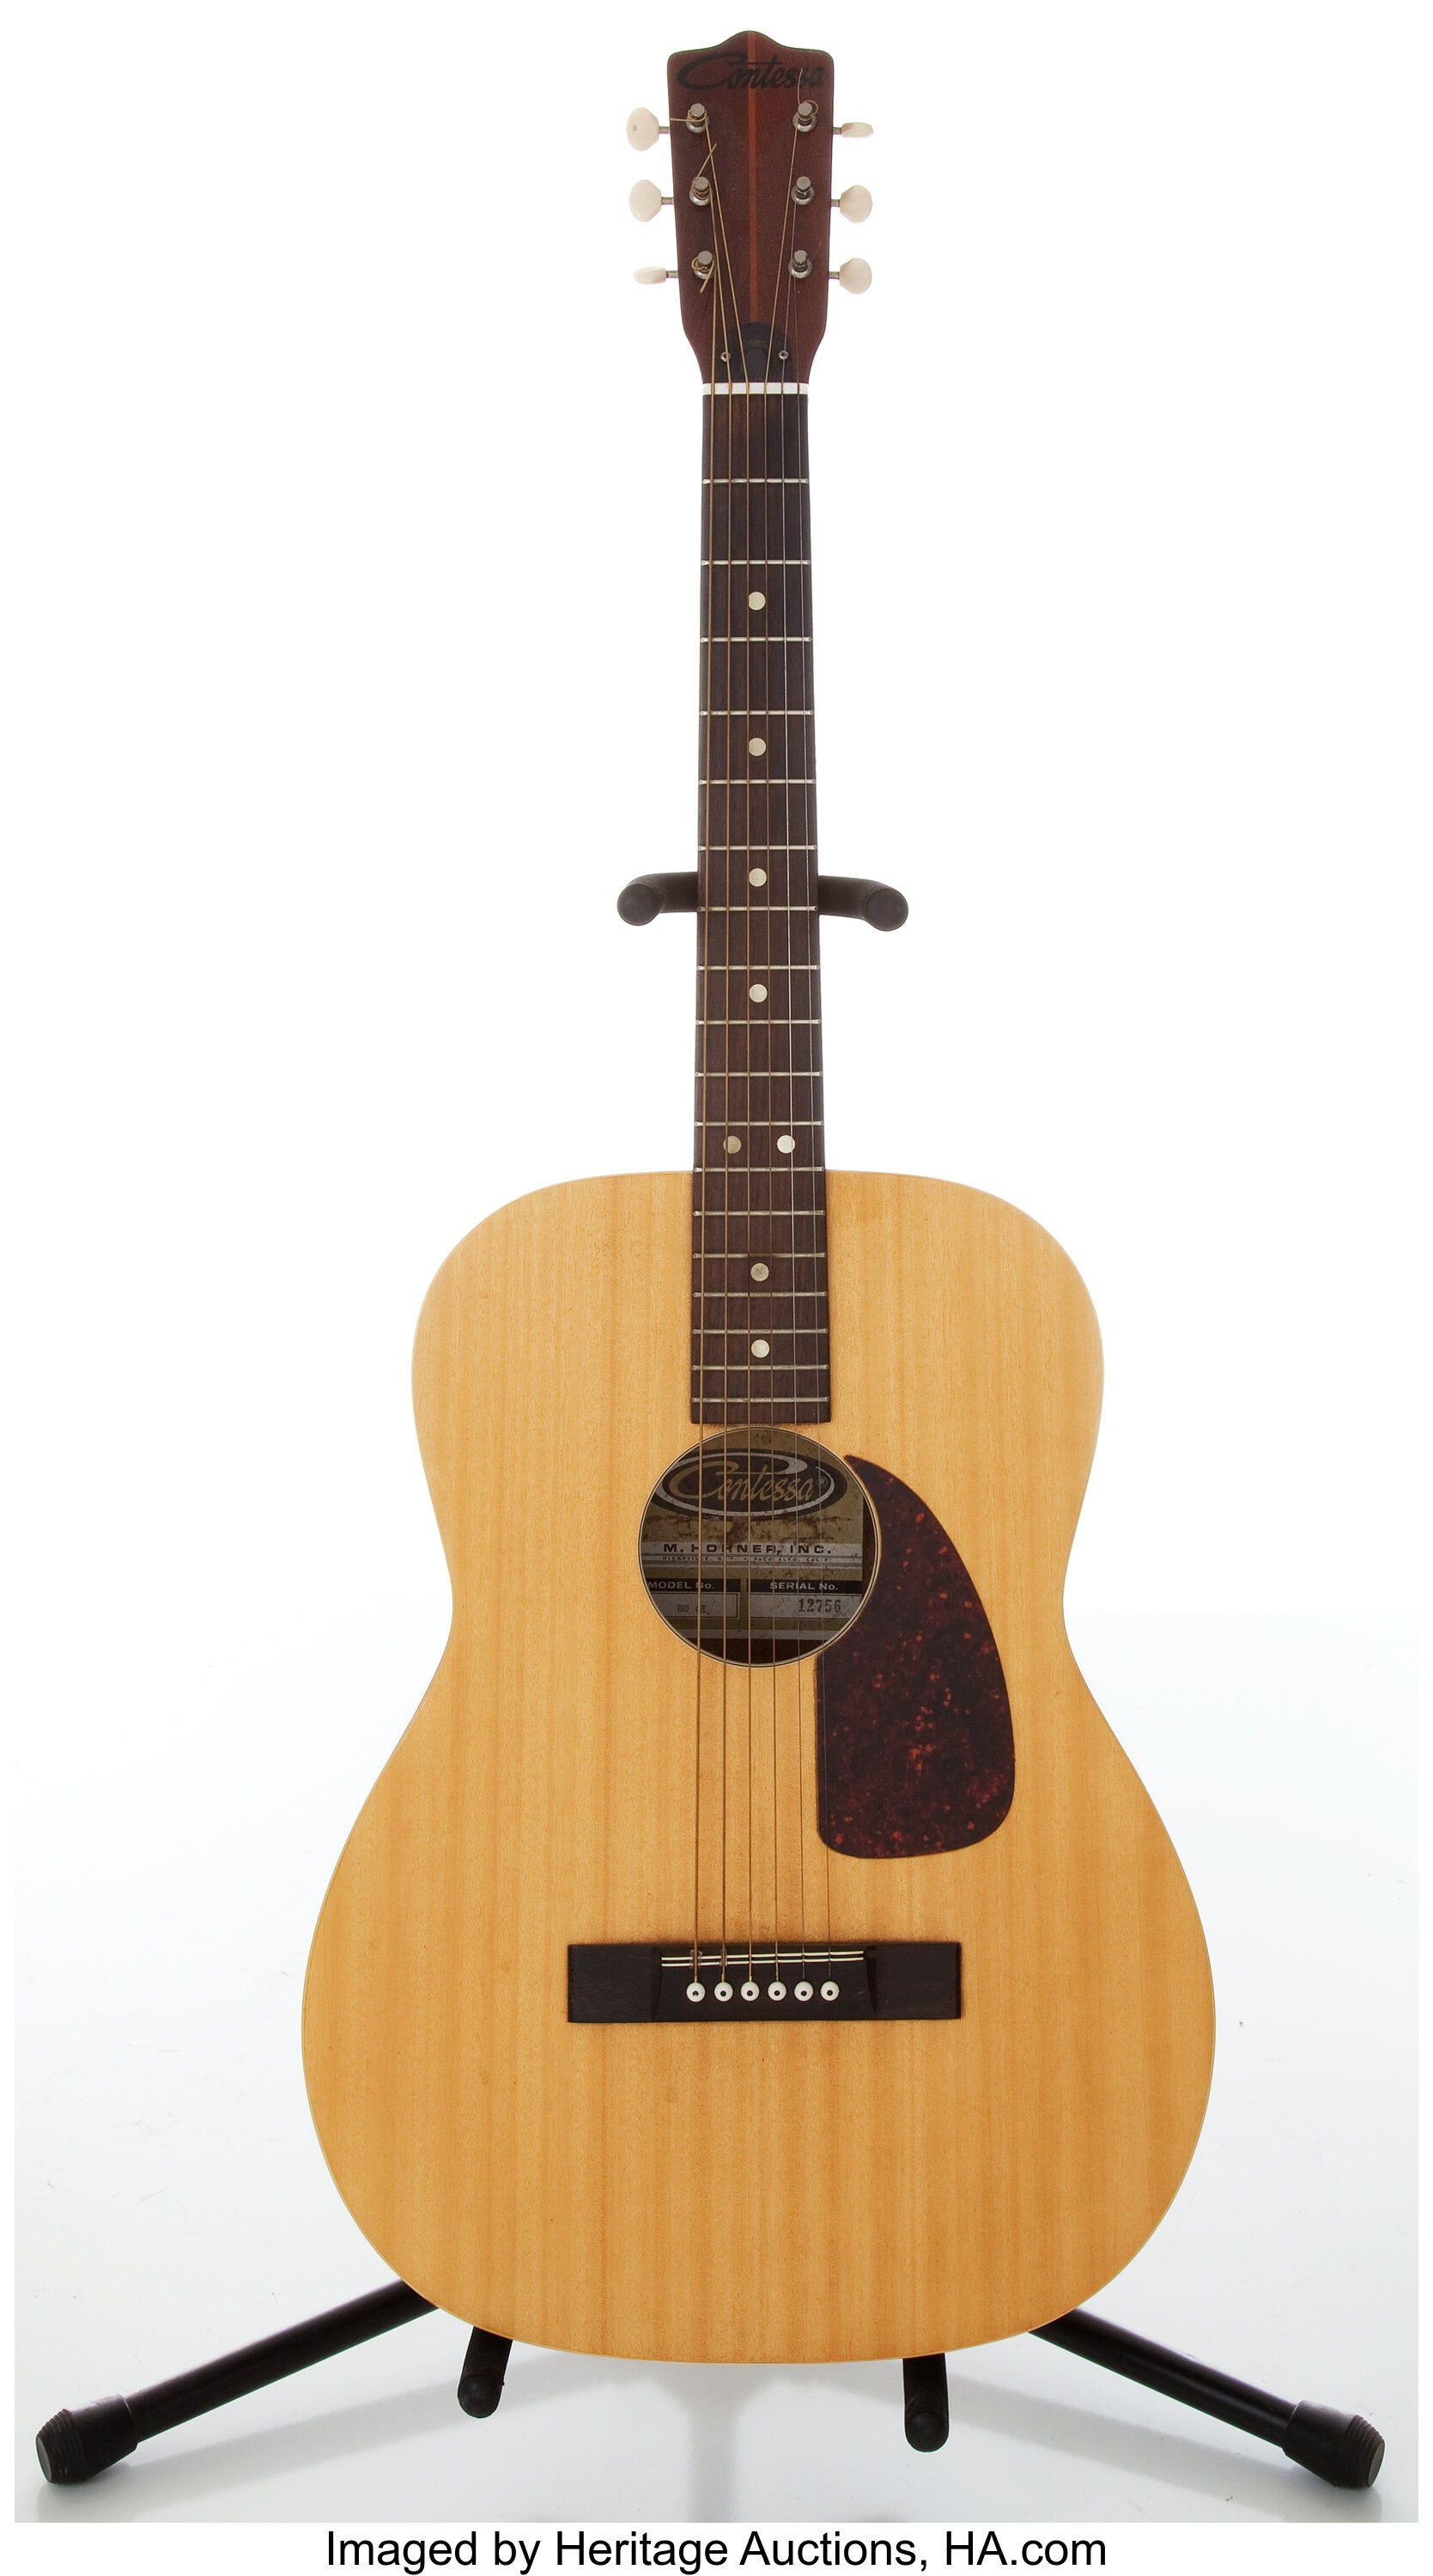 tweeling Gewaad erosie 1960s Contessa HG-0I by M. Hohner Natural Acoustic Guitar. | Lot #80010 |  Heritage Auctions